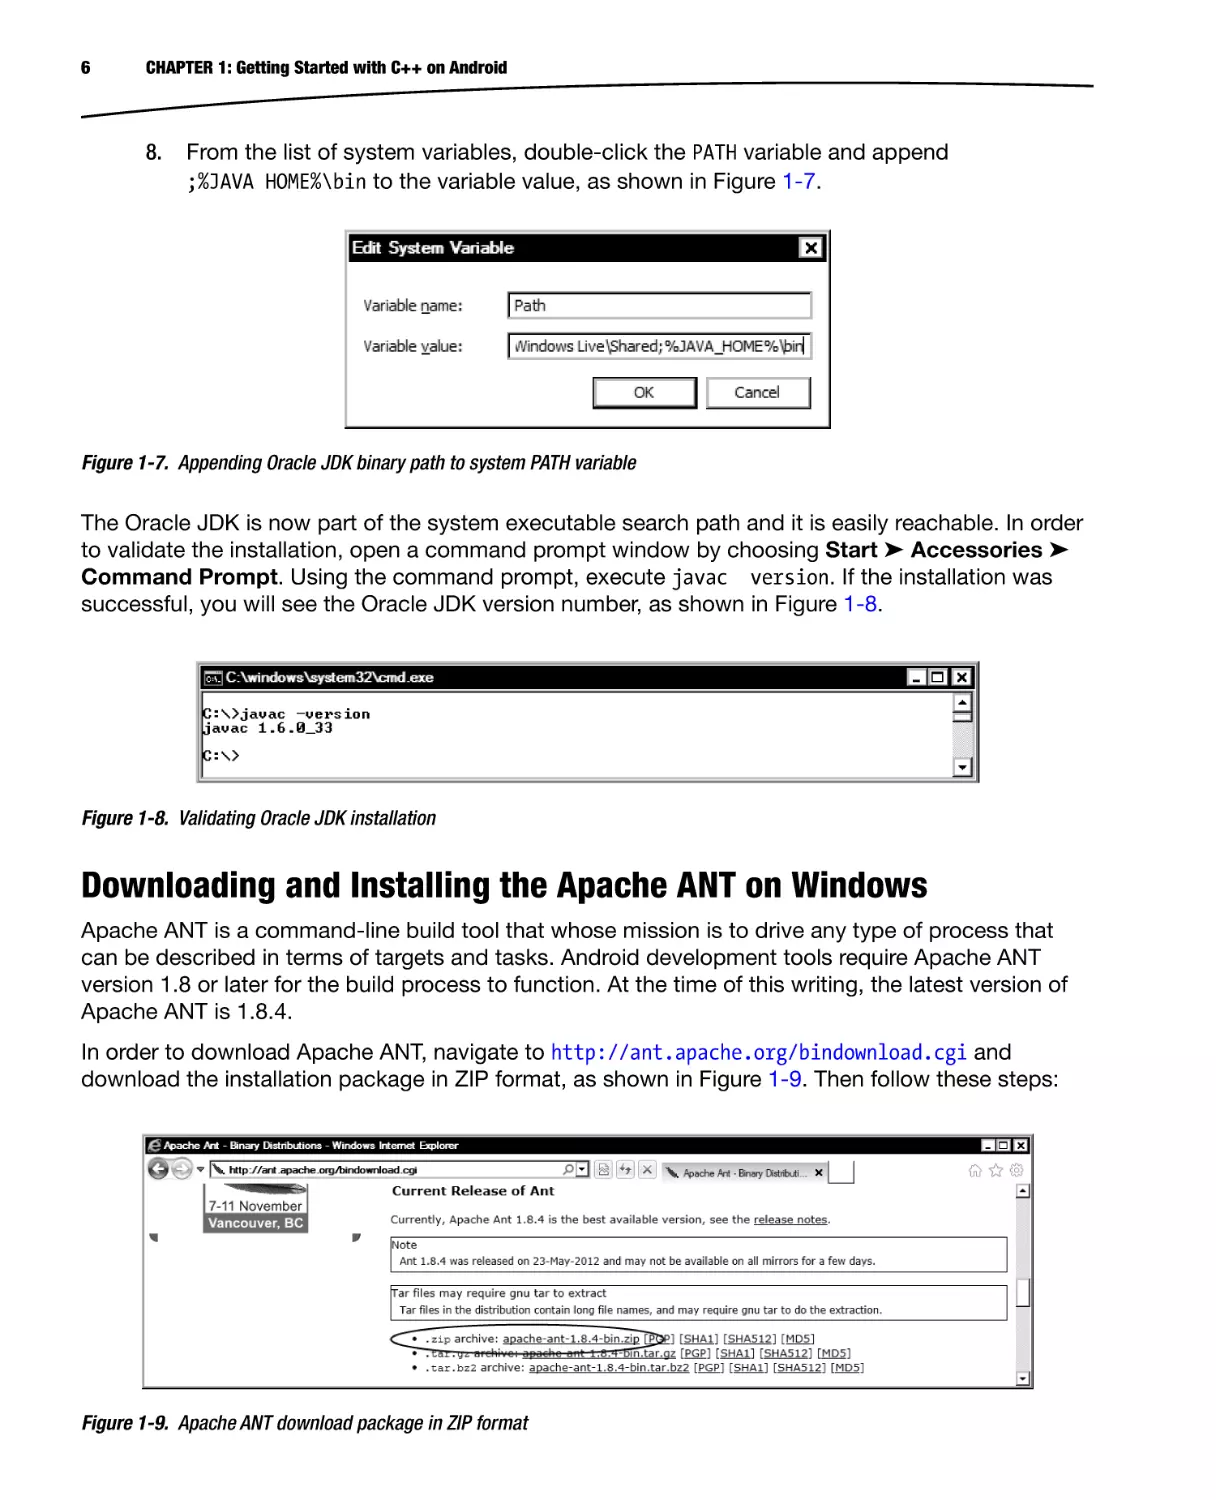 Downloading and Installing the Apache ANT on Windows